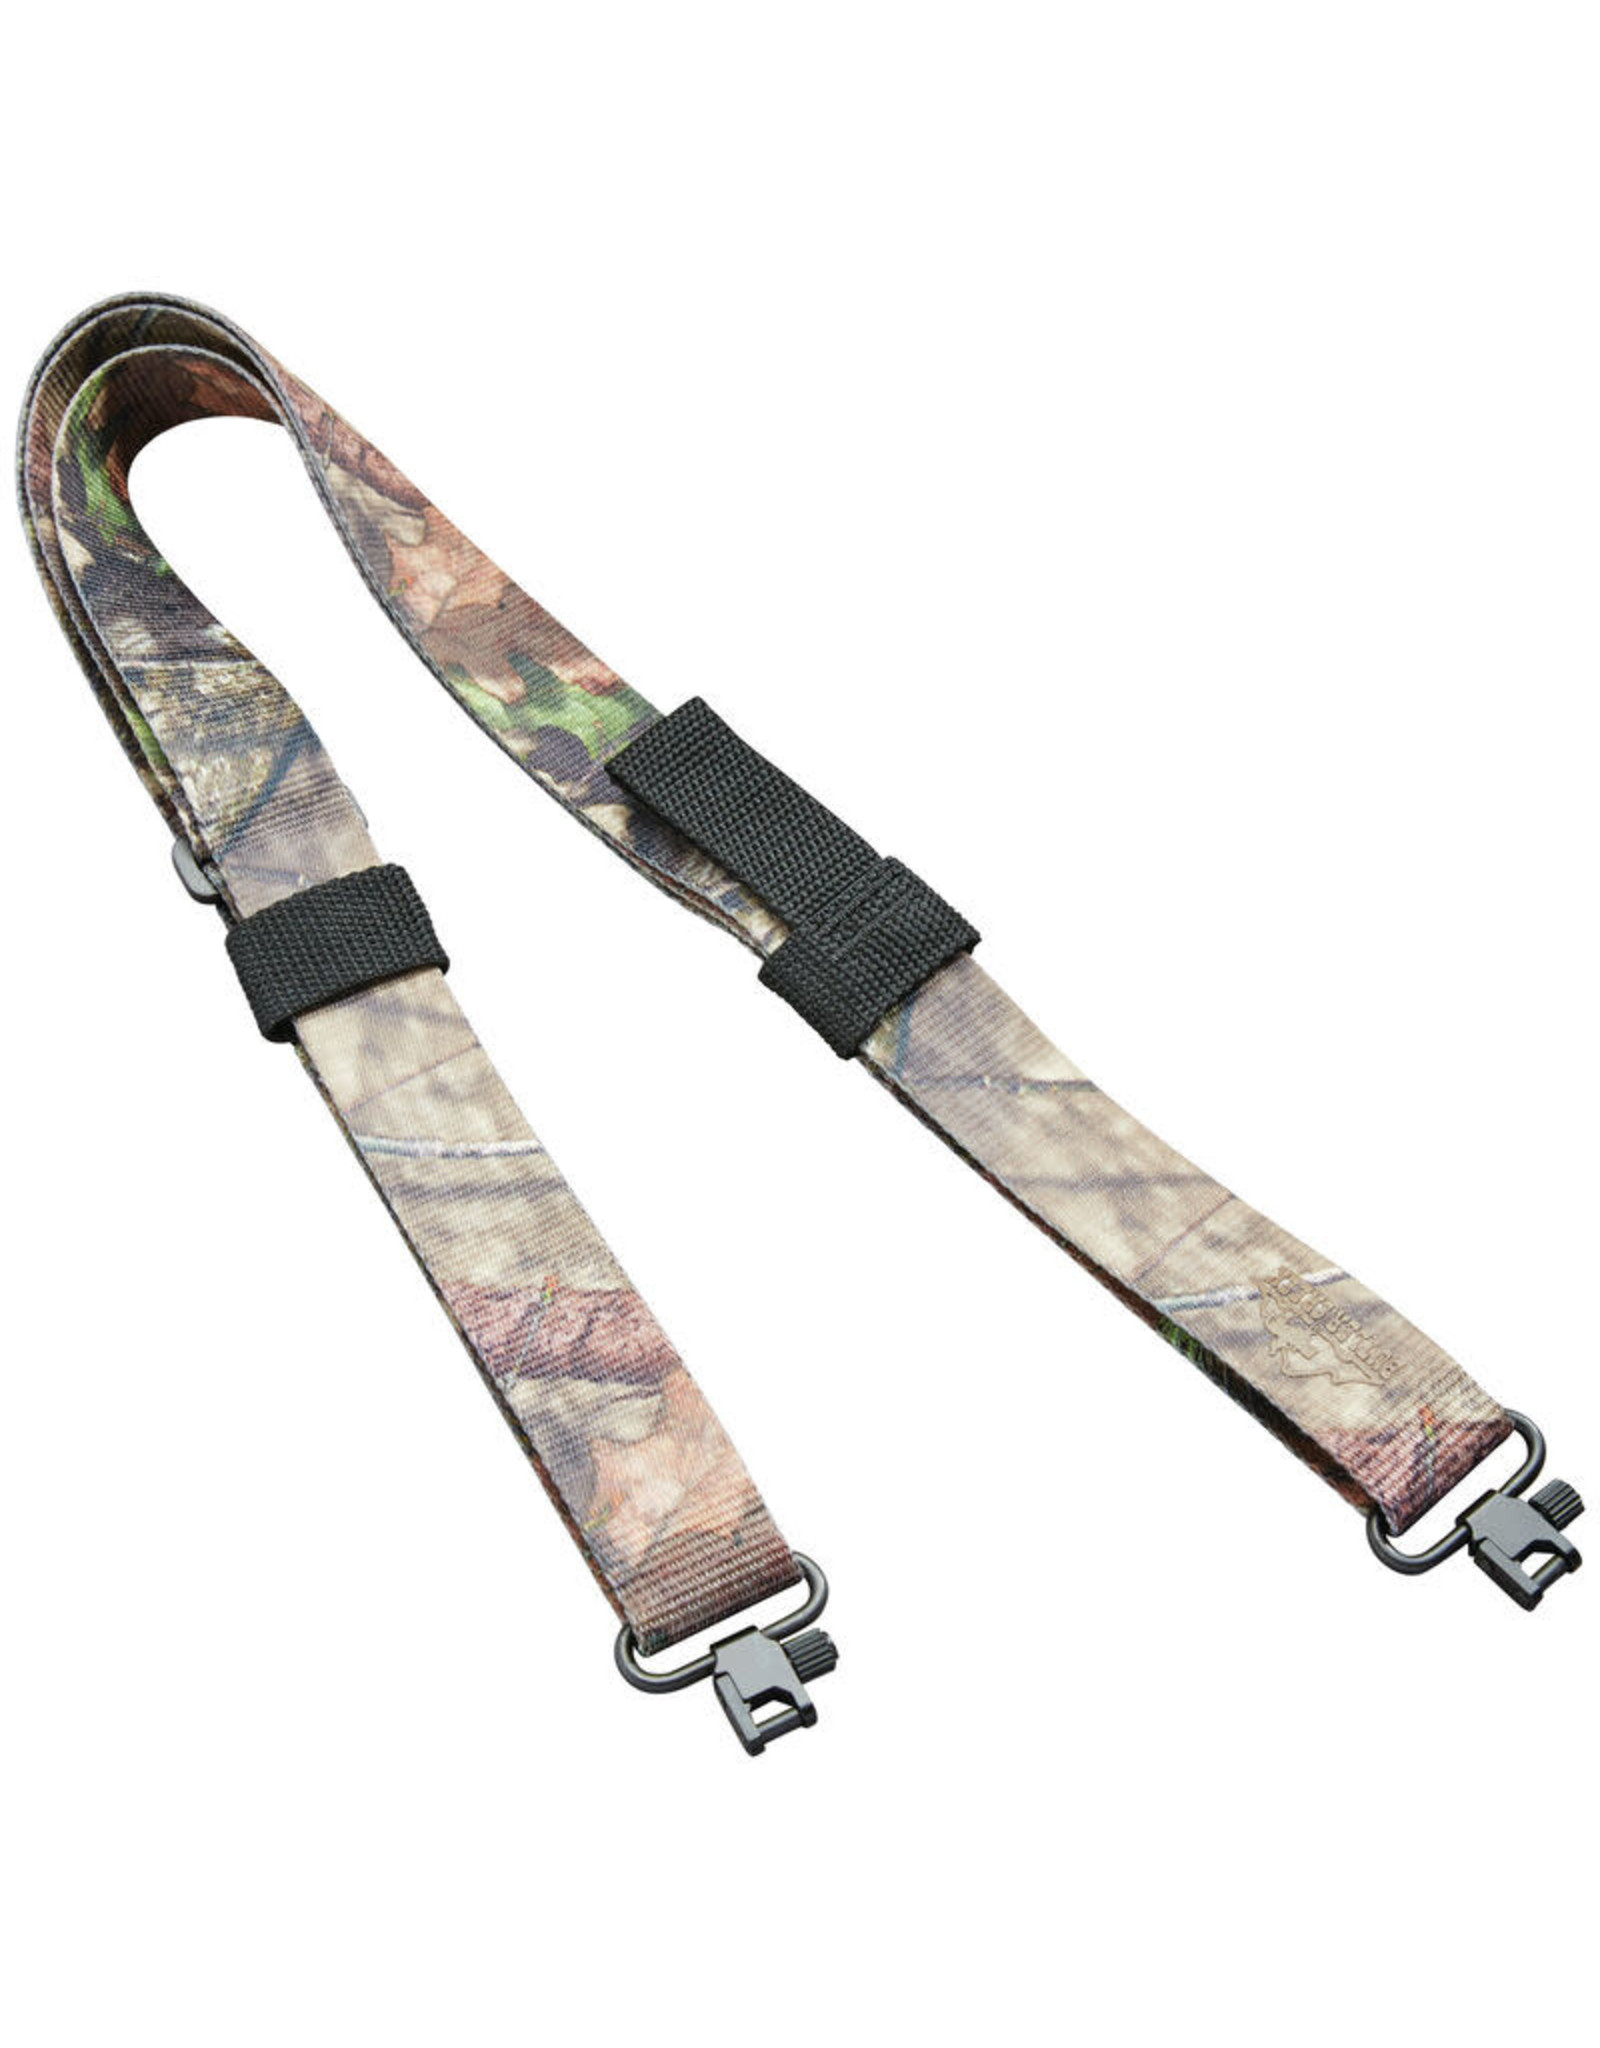 BUTLER CREEK BC QUICK CARRY SLING